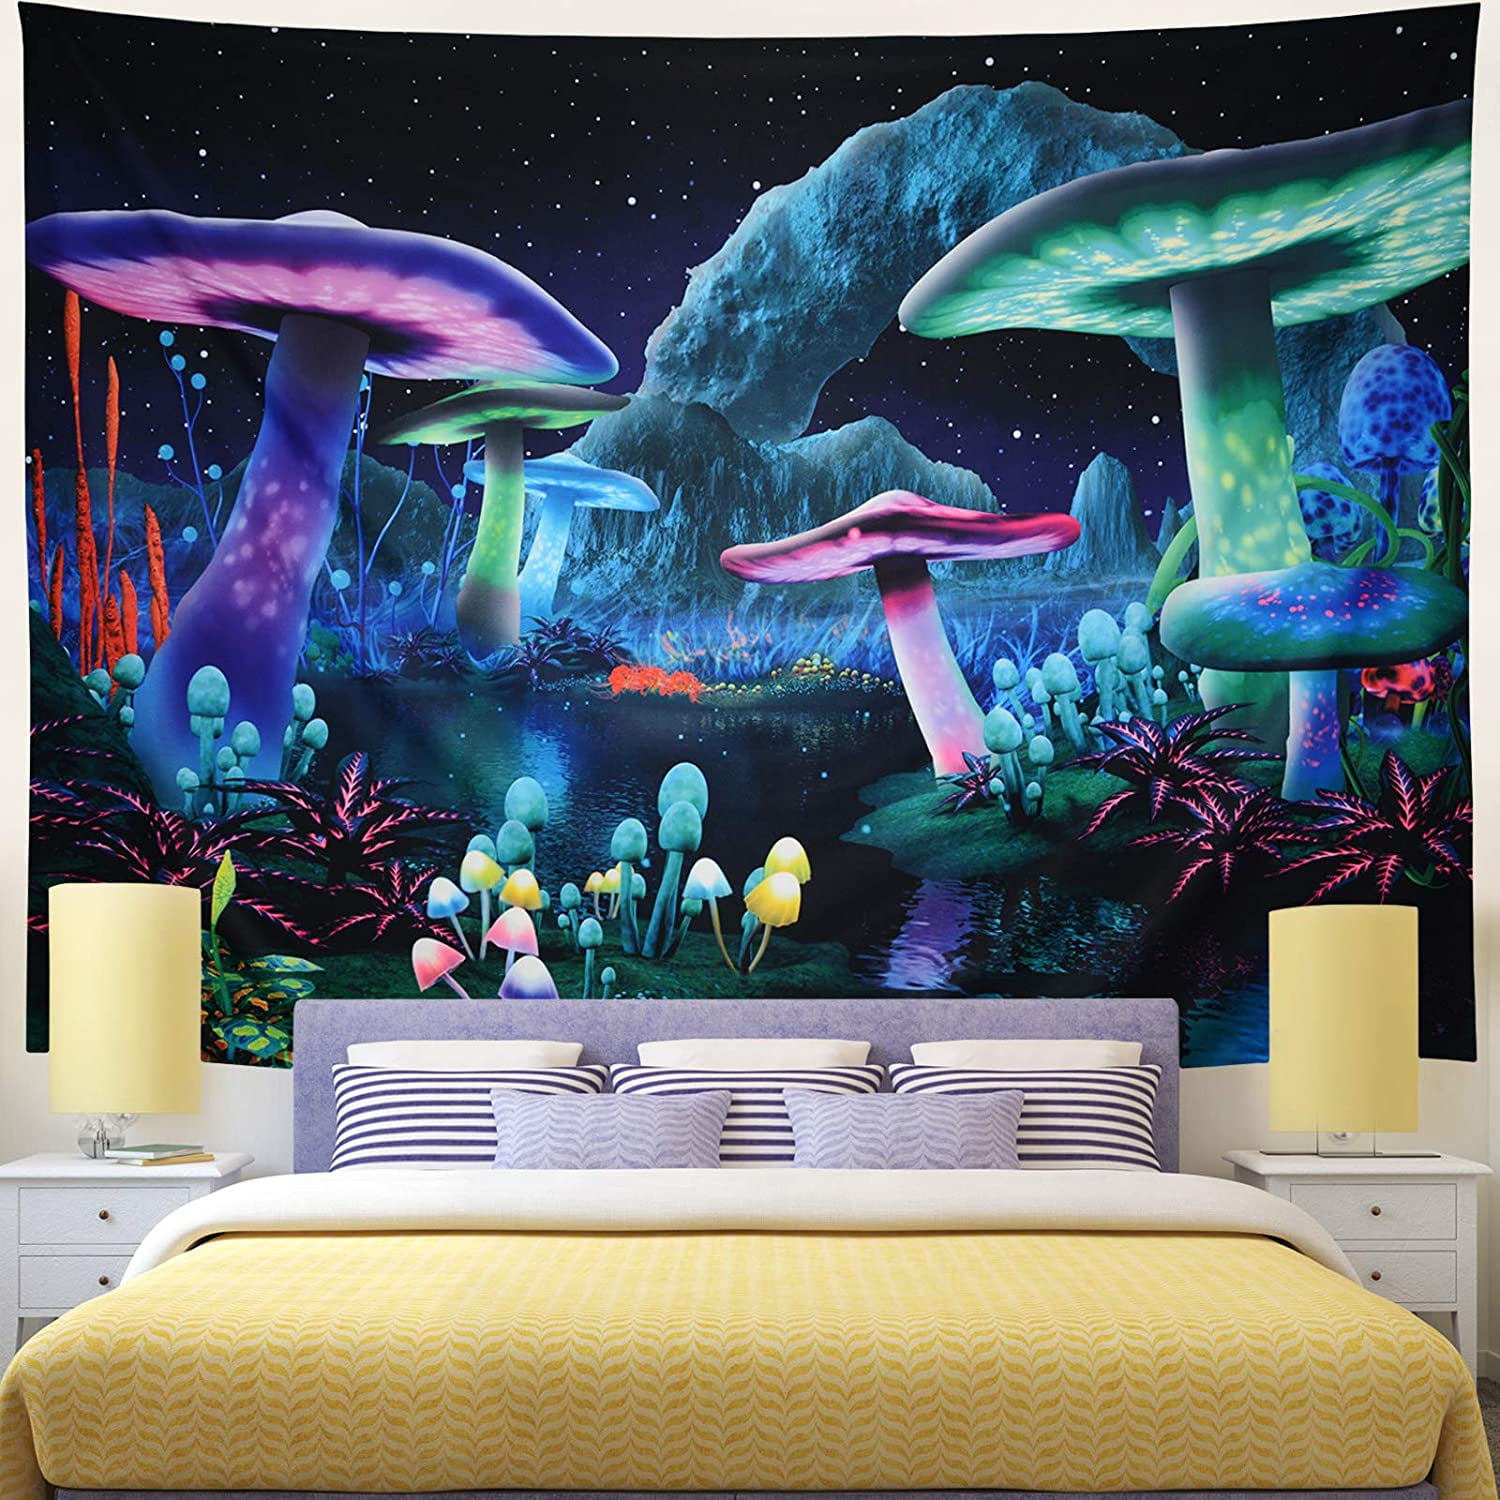 Trippy Forest Tapestry Art Wall Hanging Tapestry Decoration for Bedroom Living Room 150x130cm Yugarlibi Mushroom Tapestry Black Tapestry Wall Hanging